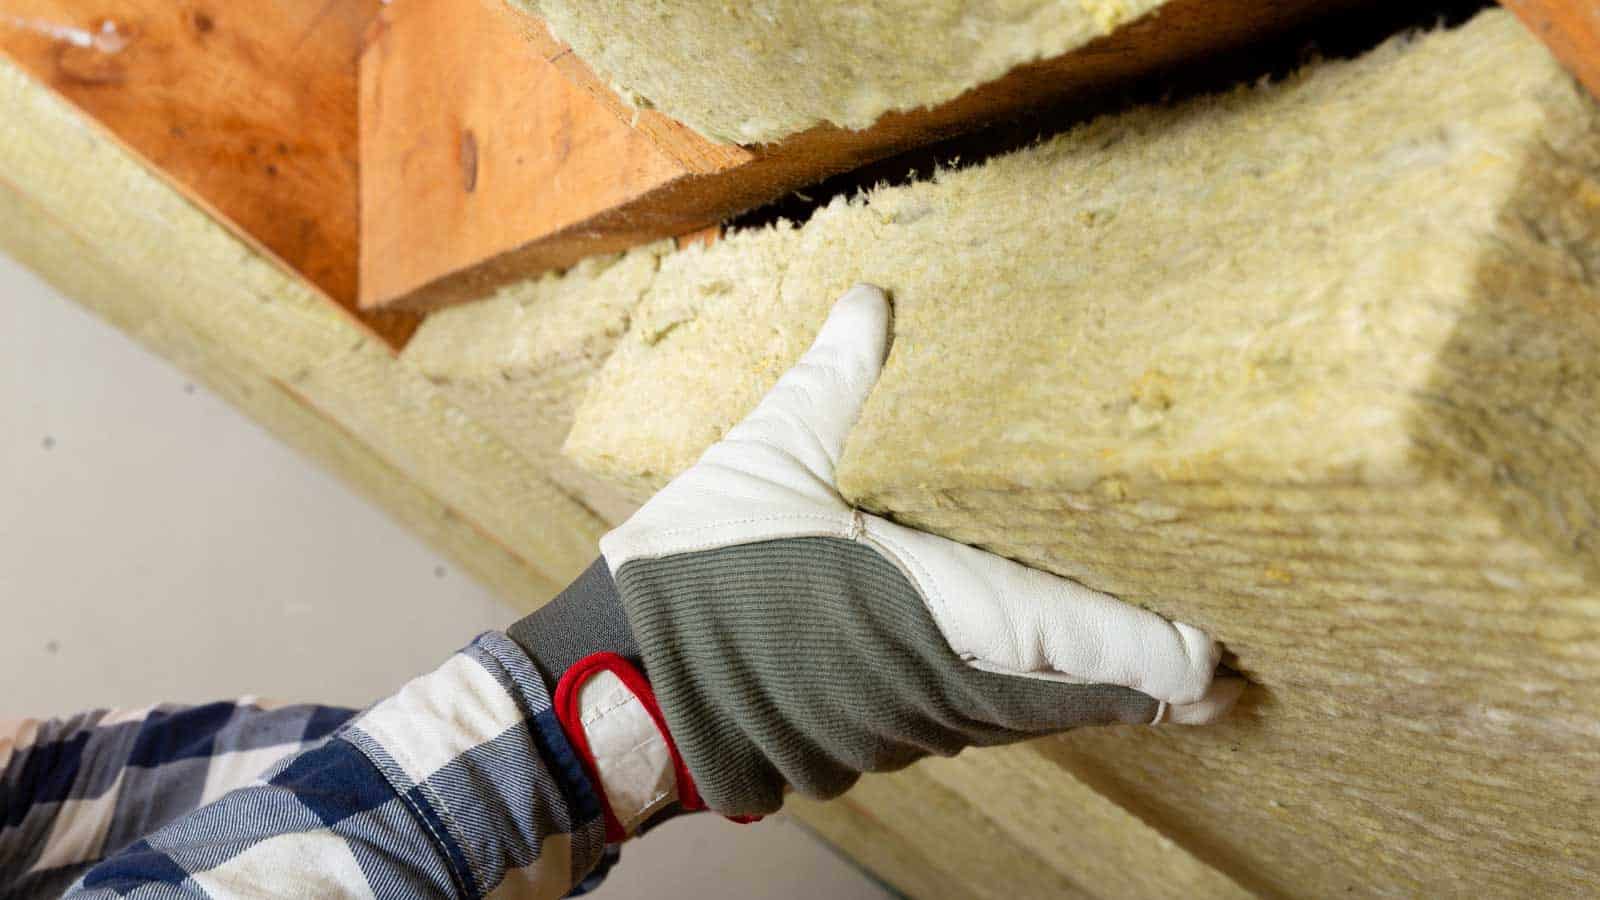 Insulate your roof properly to save money and make your house comfortable.